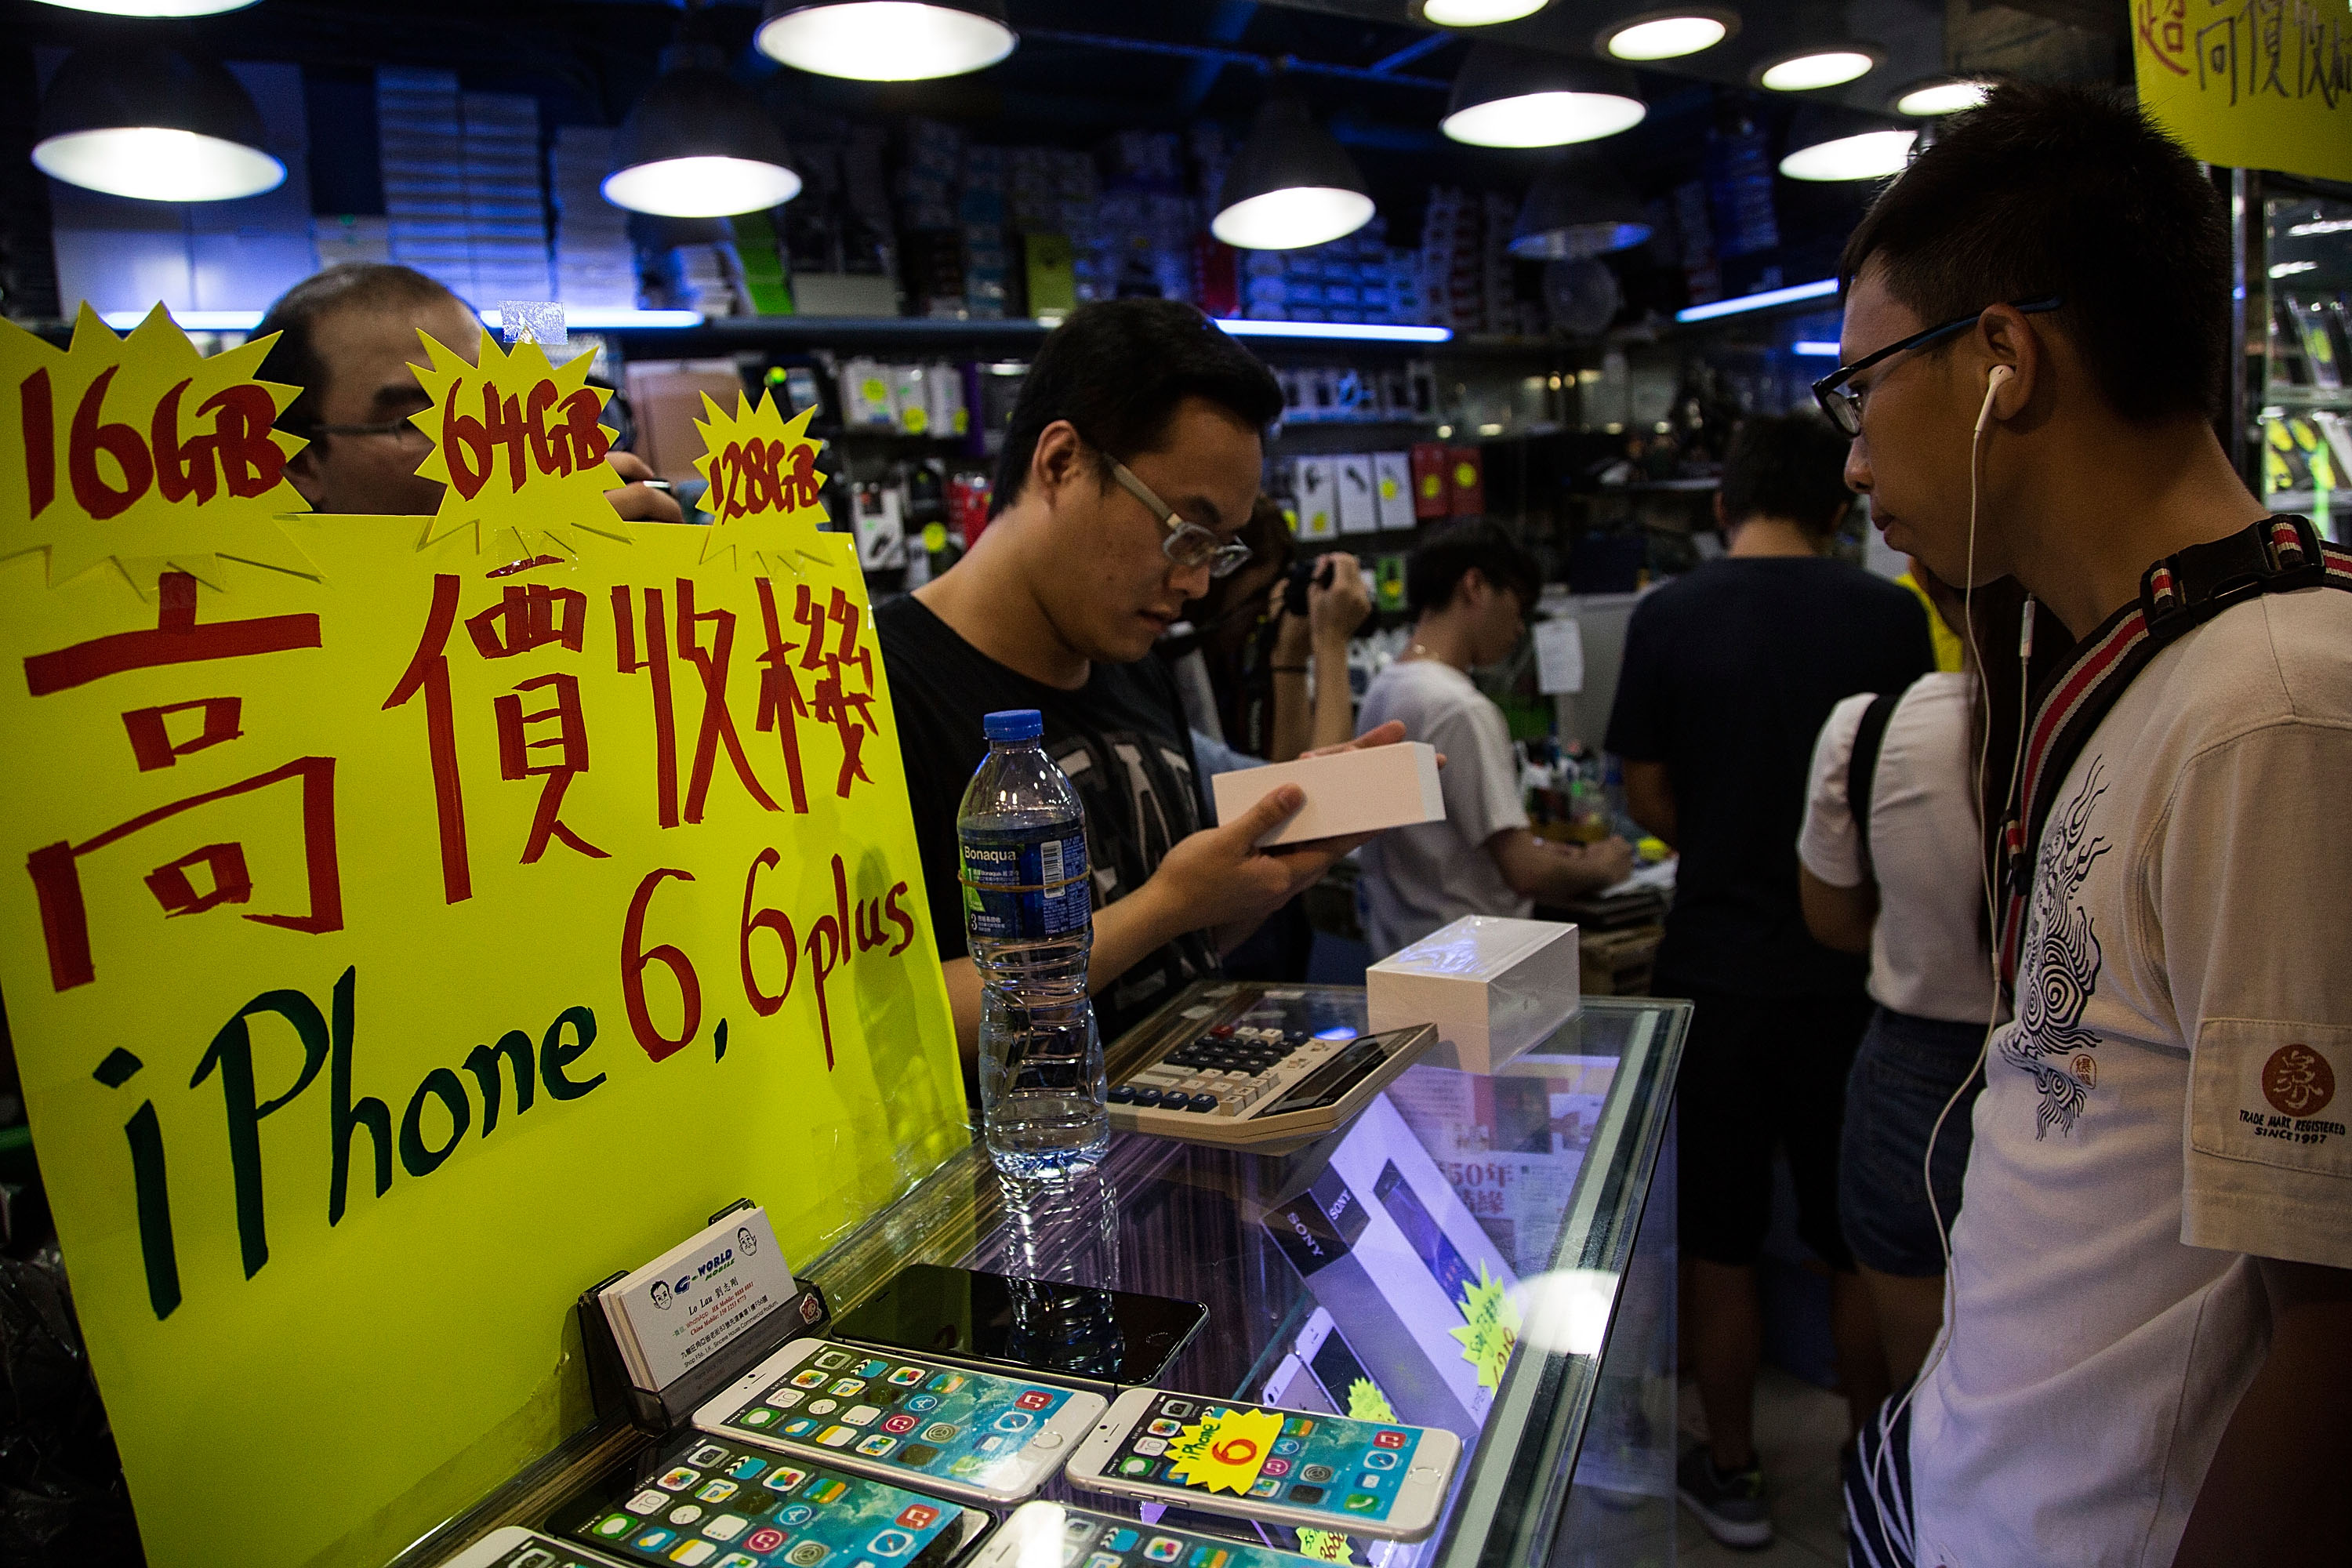 People buying and reselling newly purchased iPhone 6 units during the launch of the new Apple iPhone 6 and iPhone 6 Plus on September 19, 2014 in Hong Kong. (Lam Yik Fei&mdash;Getty Images)